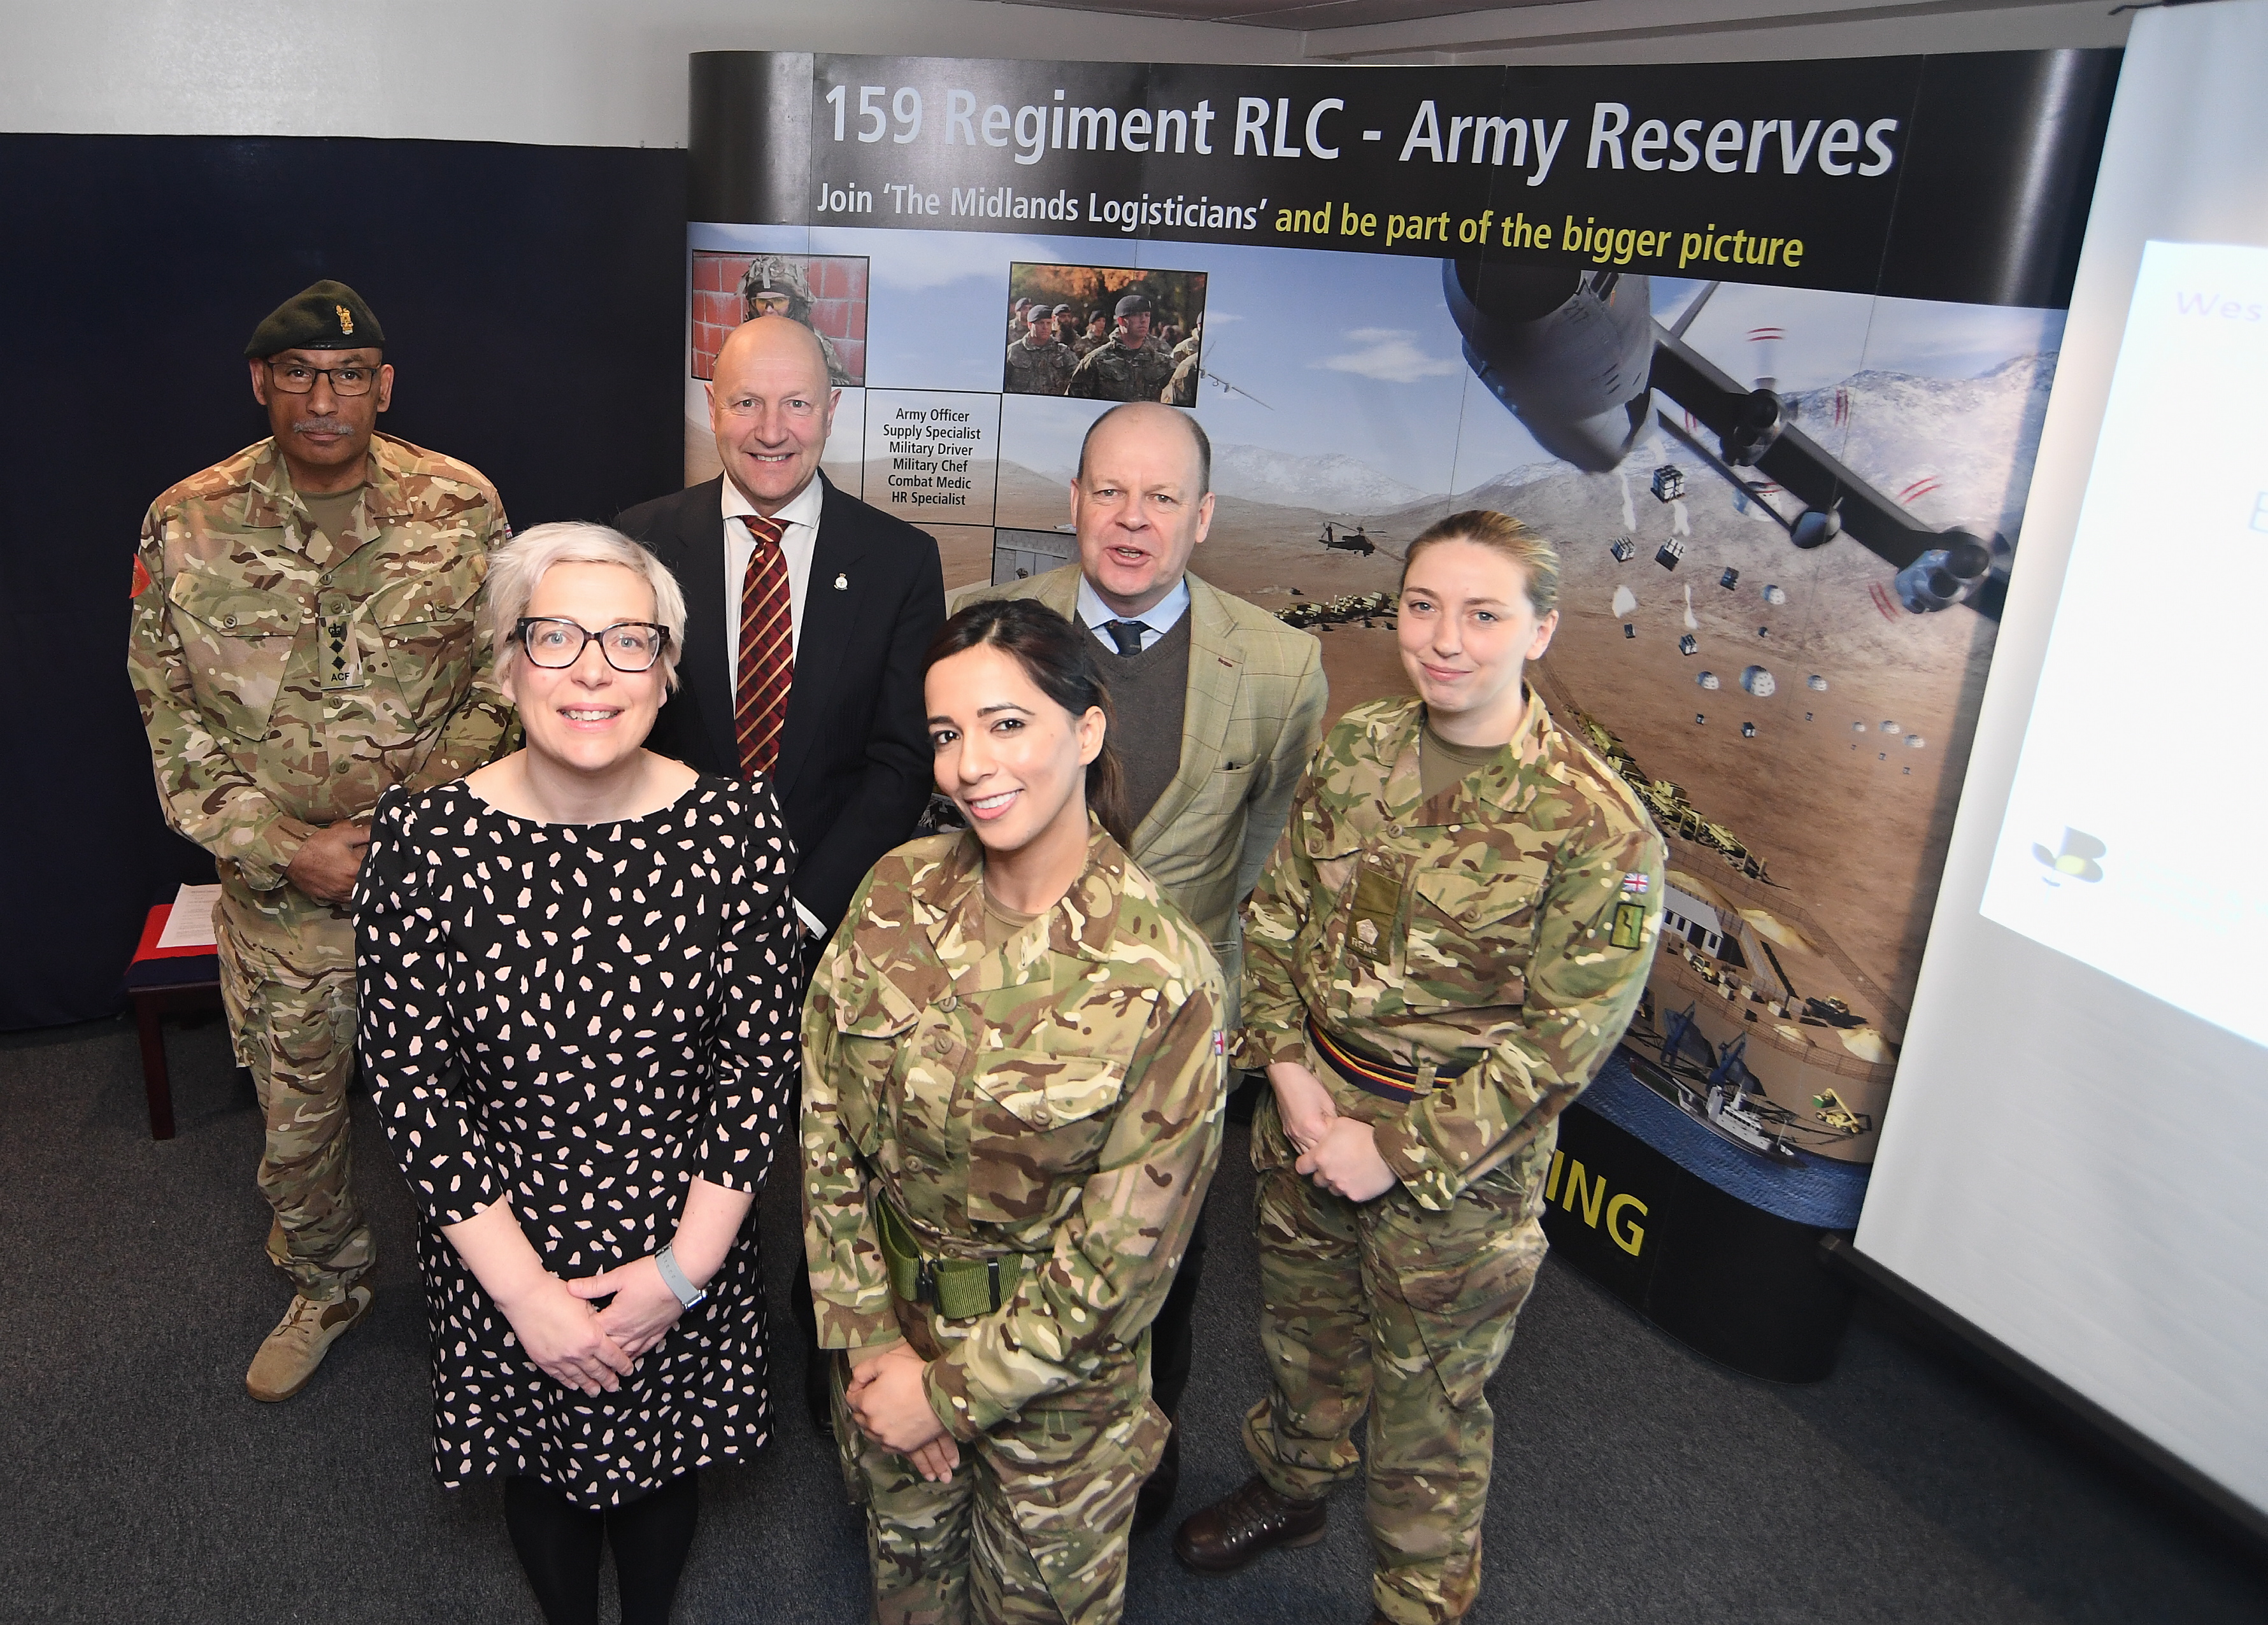 Join together with the Armed Forces to solve recruitment crisis, Coventry and Warwickshire businesses urged